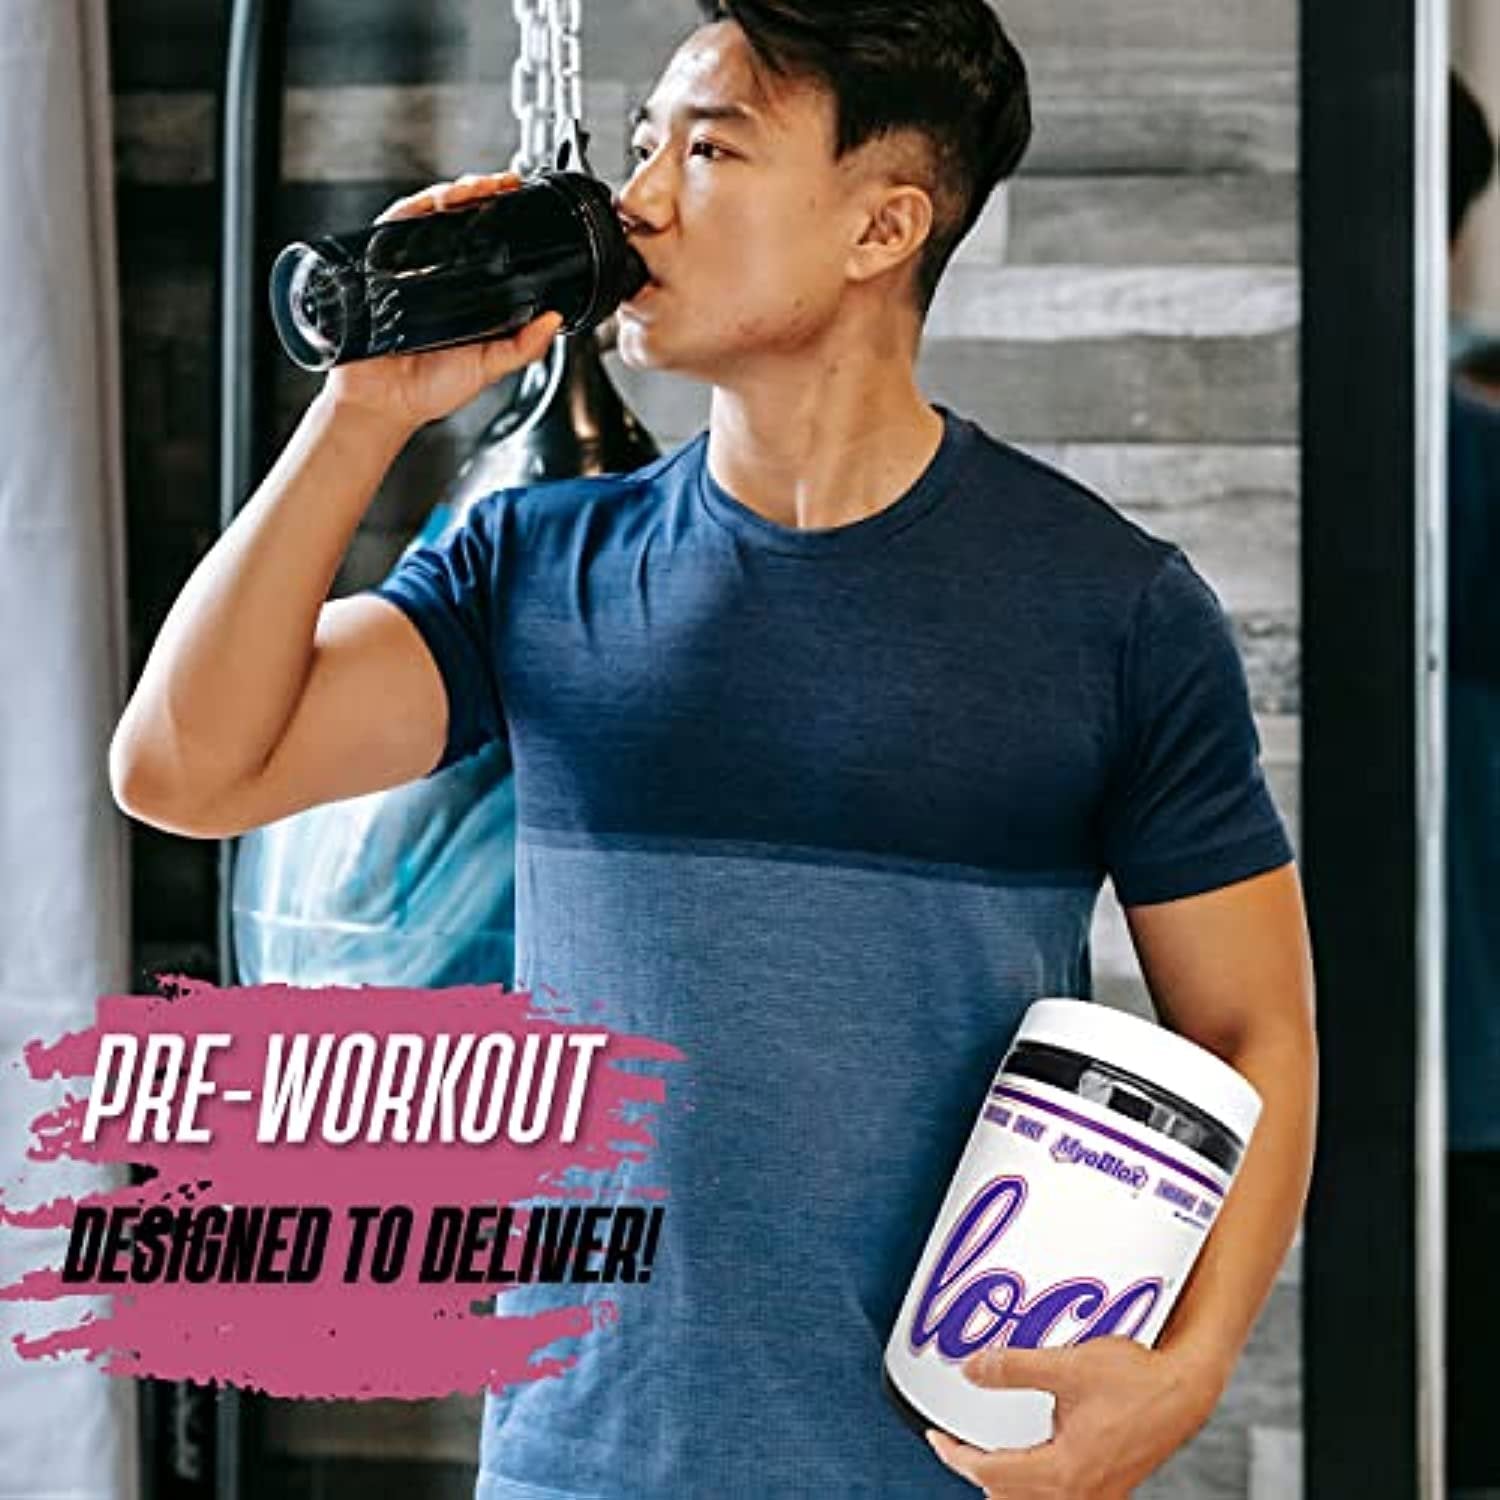 MyoBlox LOCO Pre-Workout Nitric Oxide Booster | Supports Muscle Pumps & Enhanced Vascularity | for Energy, Focus & Intensity | 400mg of Natural Caffeine per Scoop (Purple Haze) with Bonus Key Chain